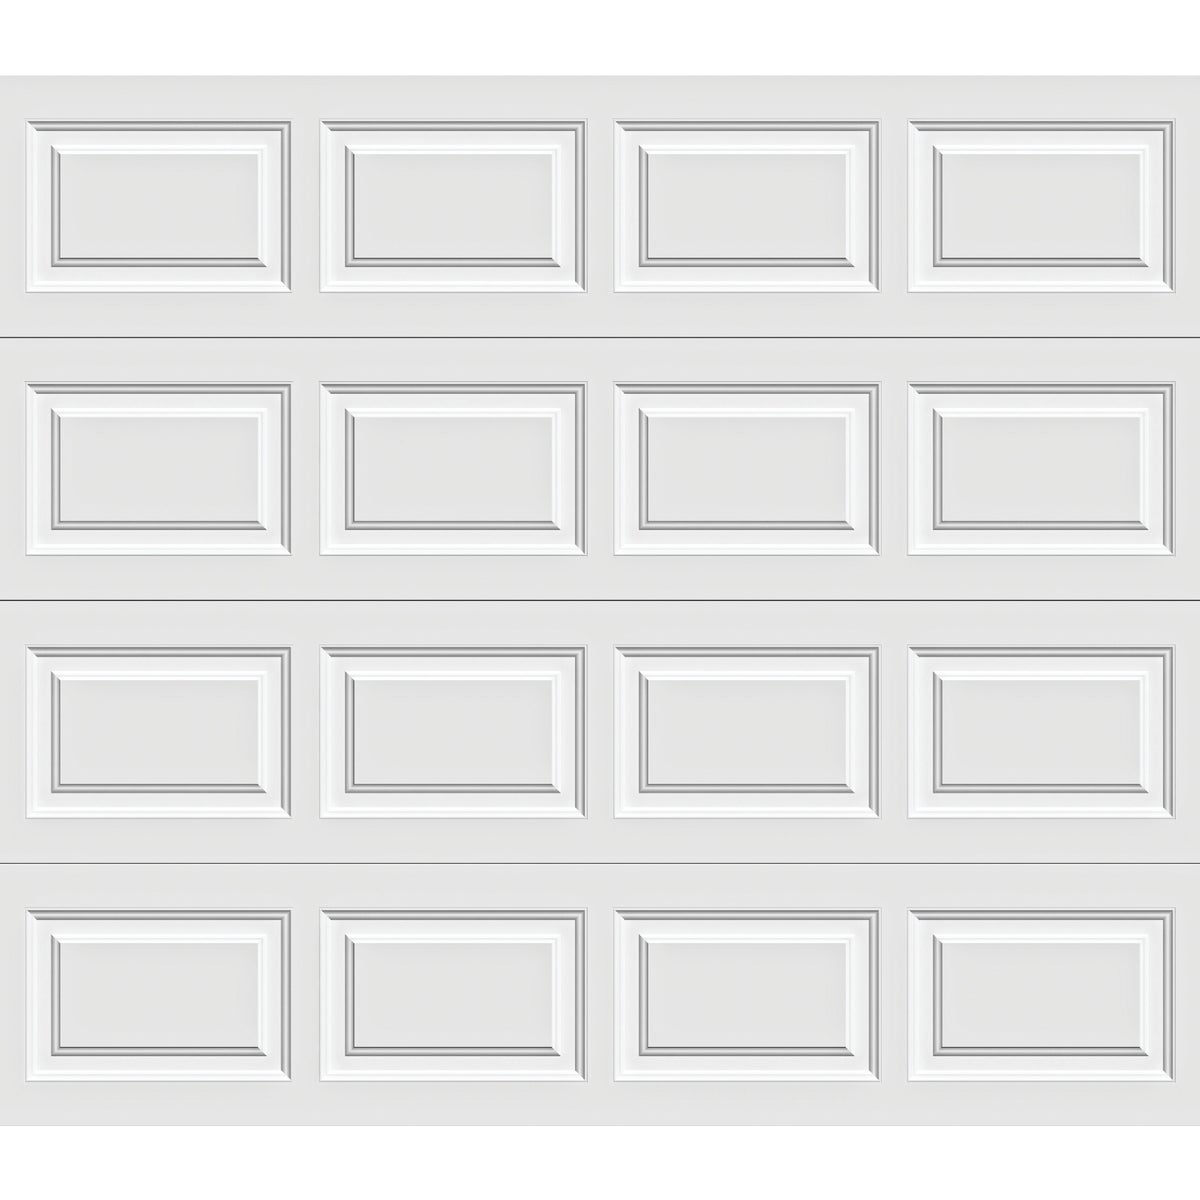 Holmes Gold Series 9 Ft. W x 7 Ft. H White Insulated Steel Garage Door w/Extension Springs